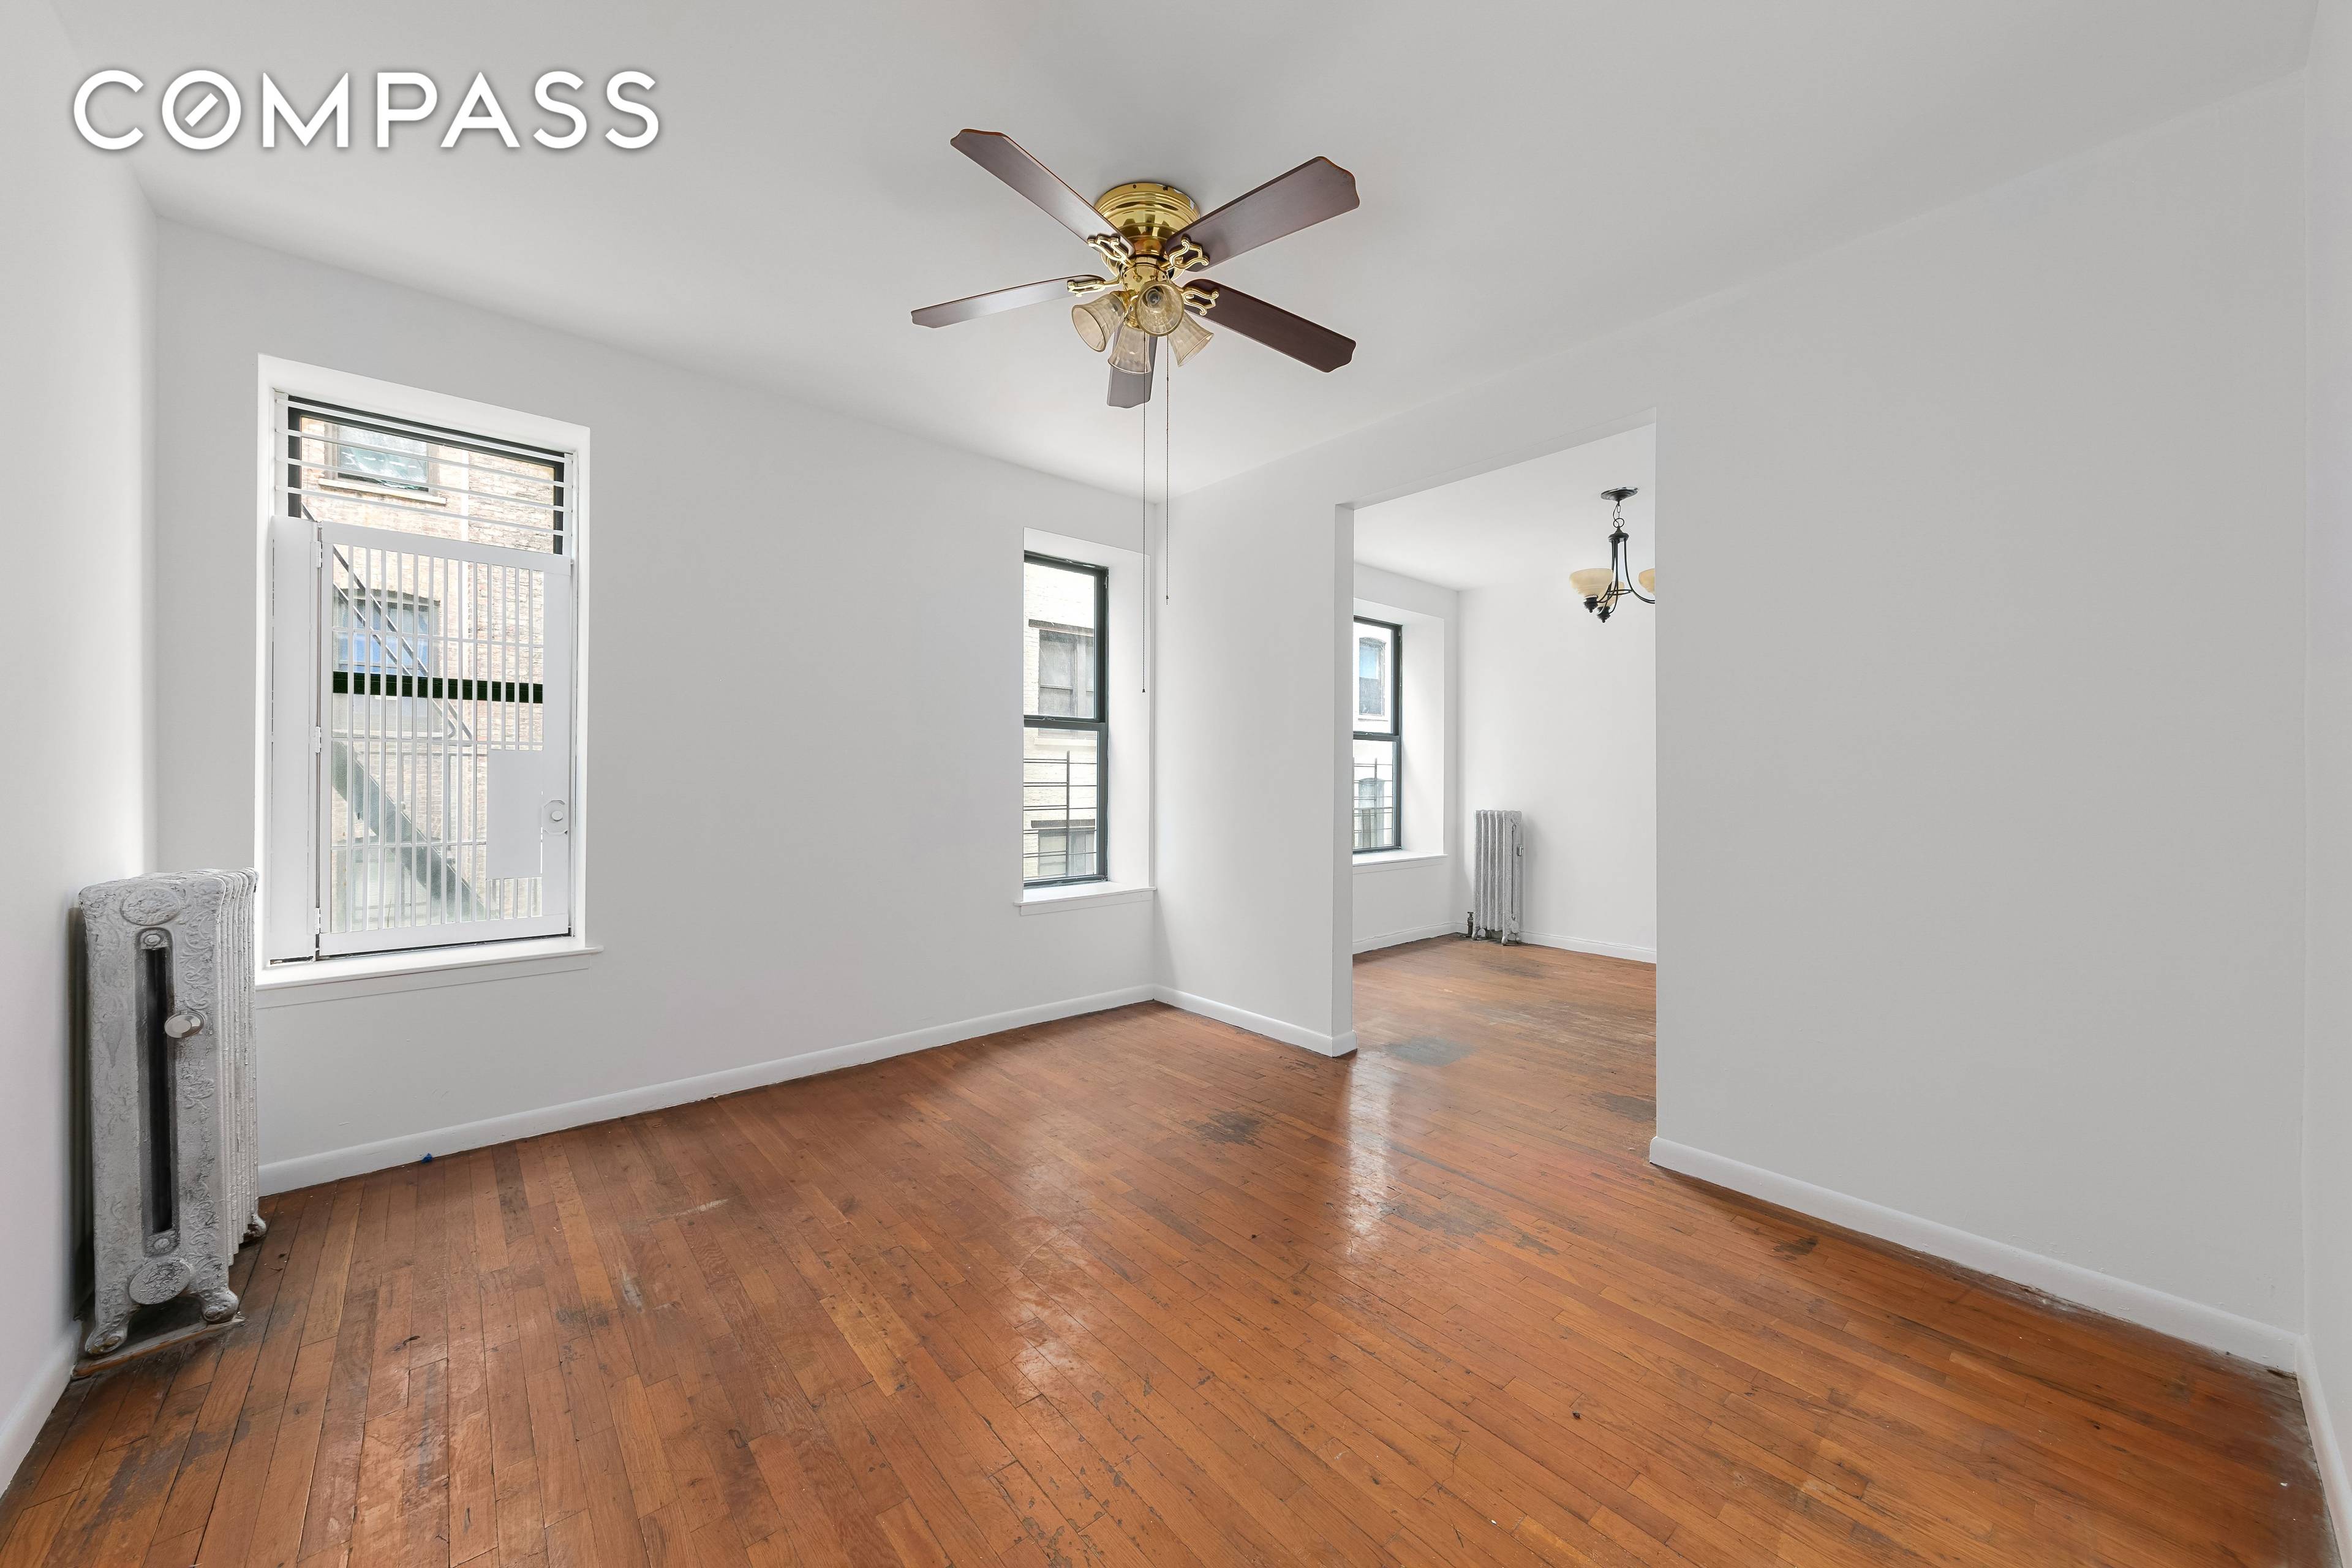 Large and spacious 2 bedroom apartment in West Harlem.